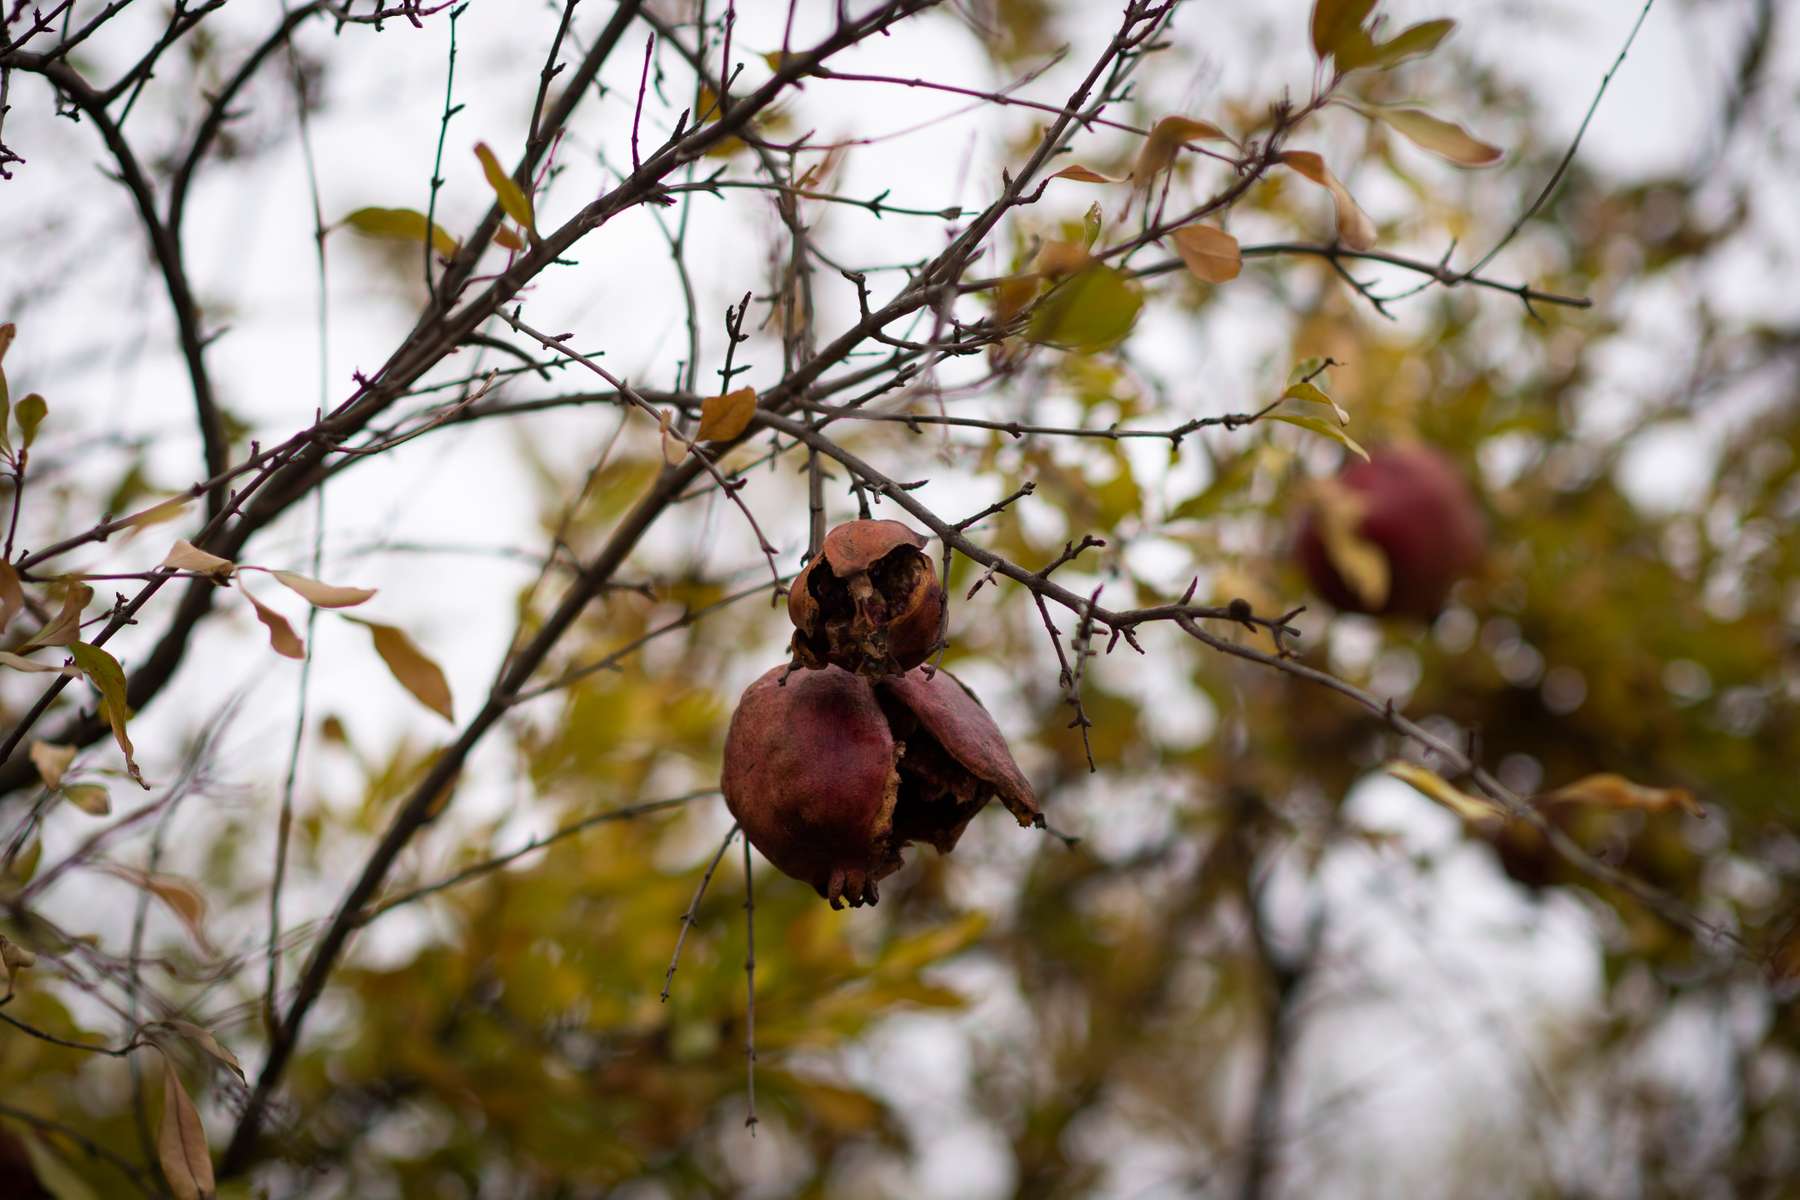 Pomegranates begin to rot on the vine, waiting for families to return to their lands.